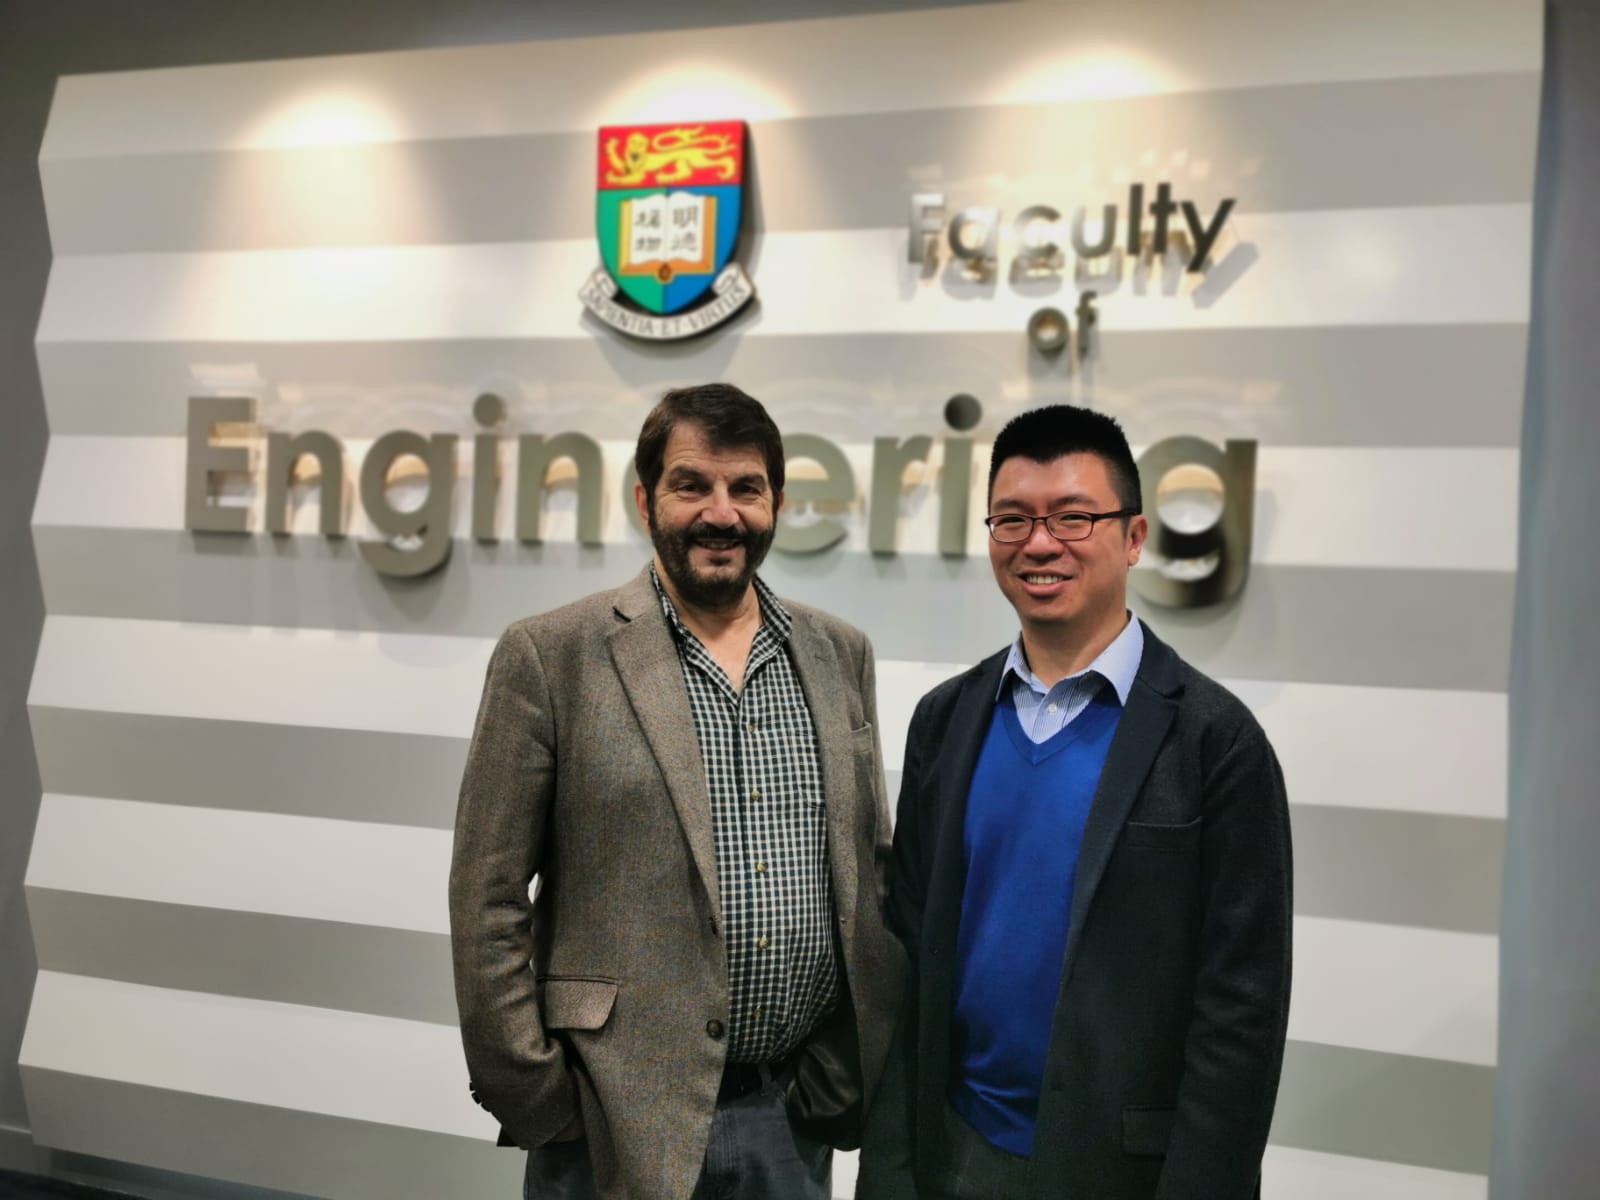 Professor Anderson Shum (Right) from HKU Engineering, the parent institution, and Professor David Weitz (Left) from Harvard School of Engineering and Applied Sciences, the participating institution, direct the scientific endeavors in the Centre.